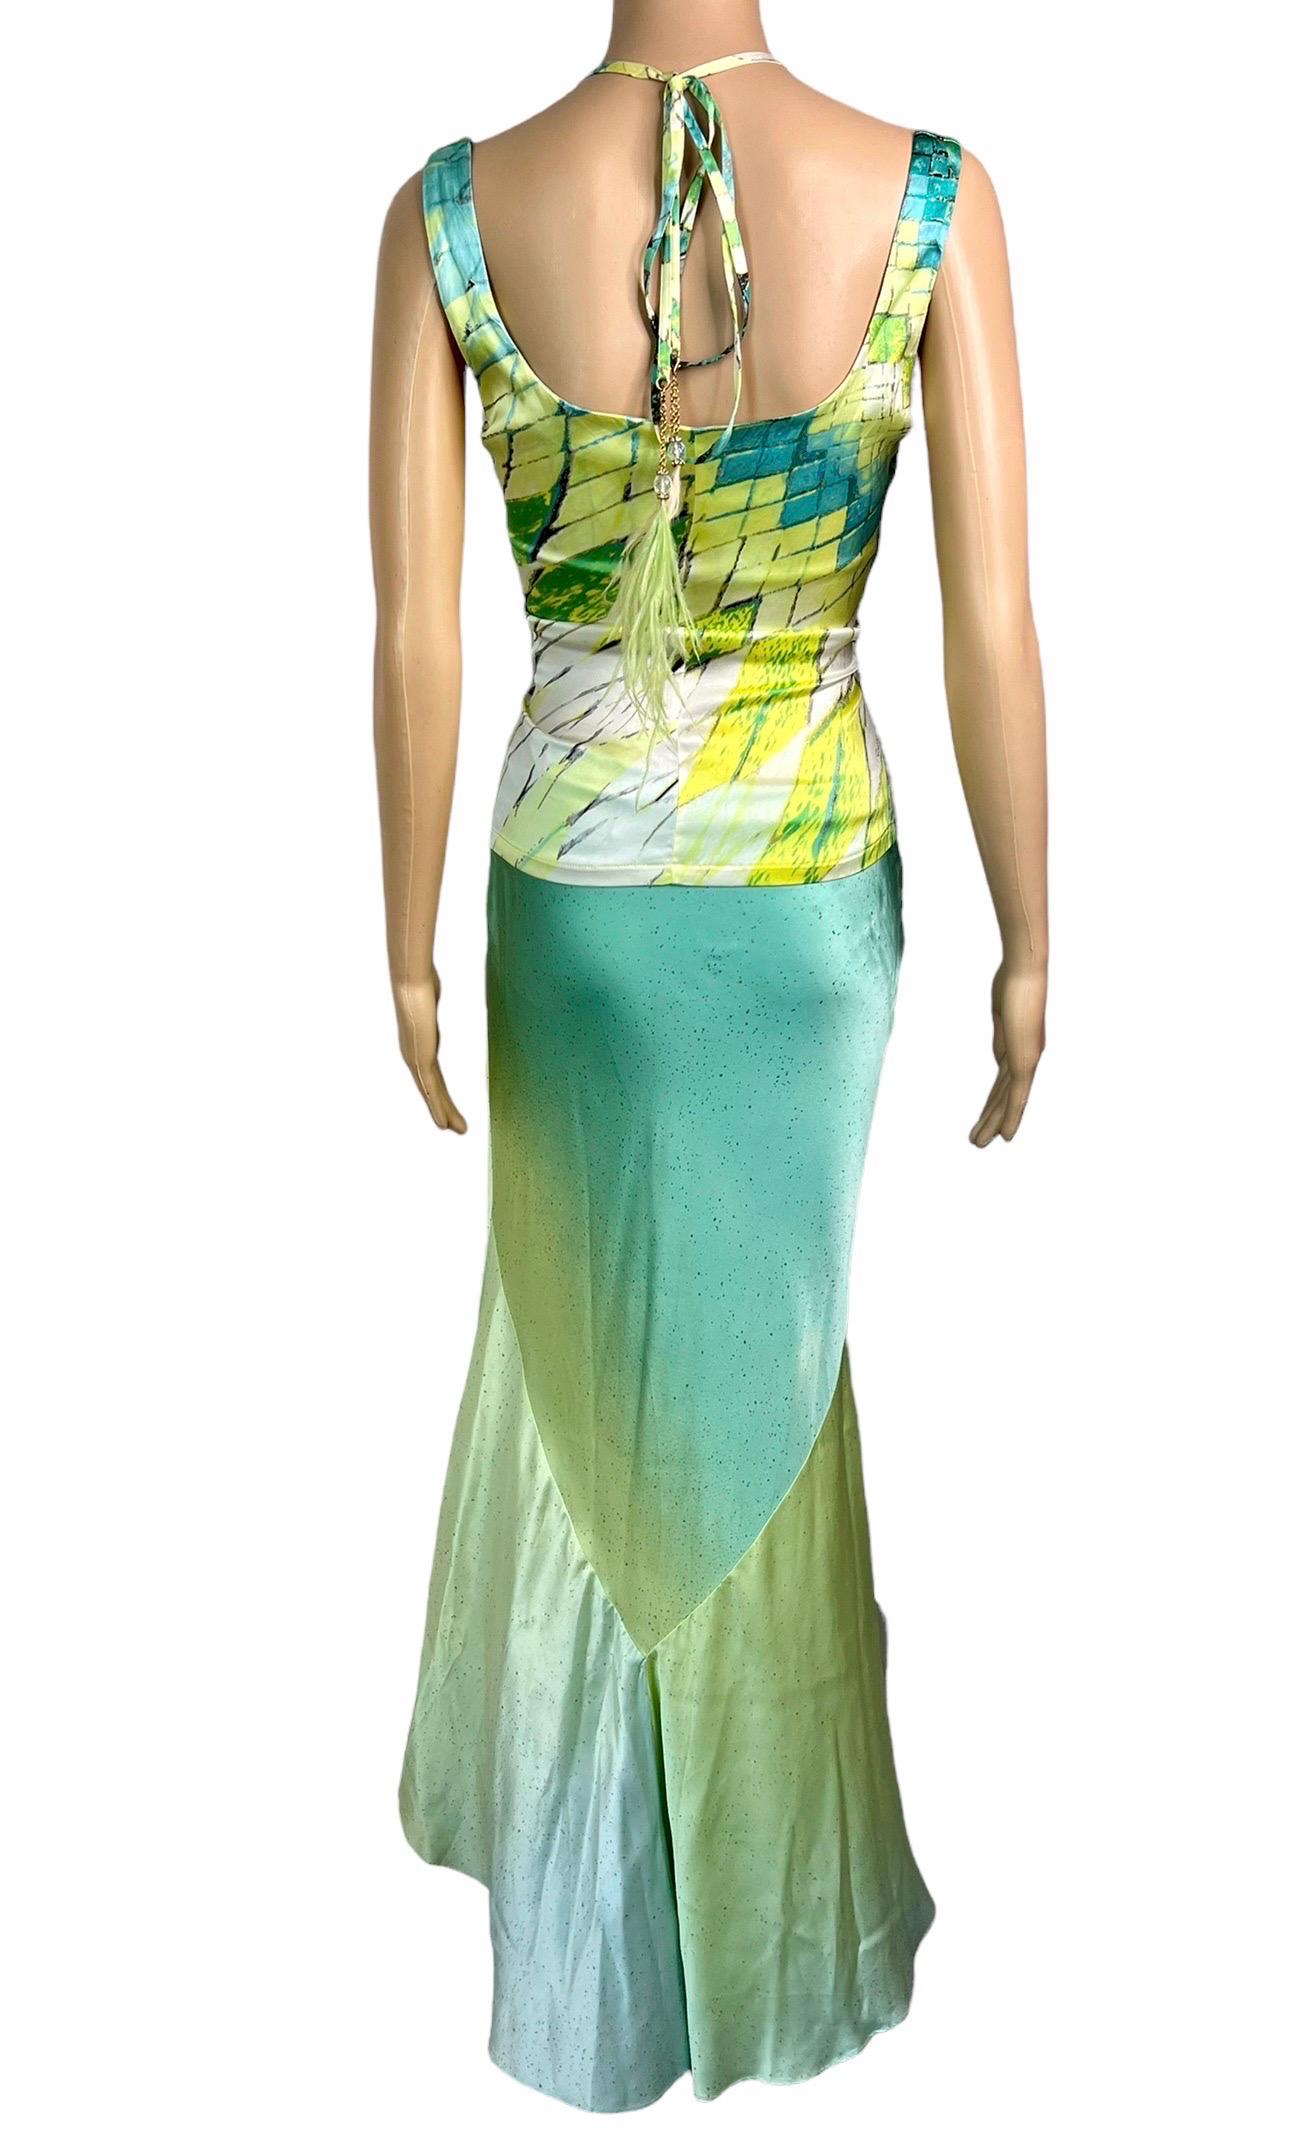 Roberto Cavalli S/S 2004 Feather Embellished Halter Top & Maxi Skirt 2 Piece Set For Sale 3